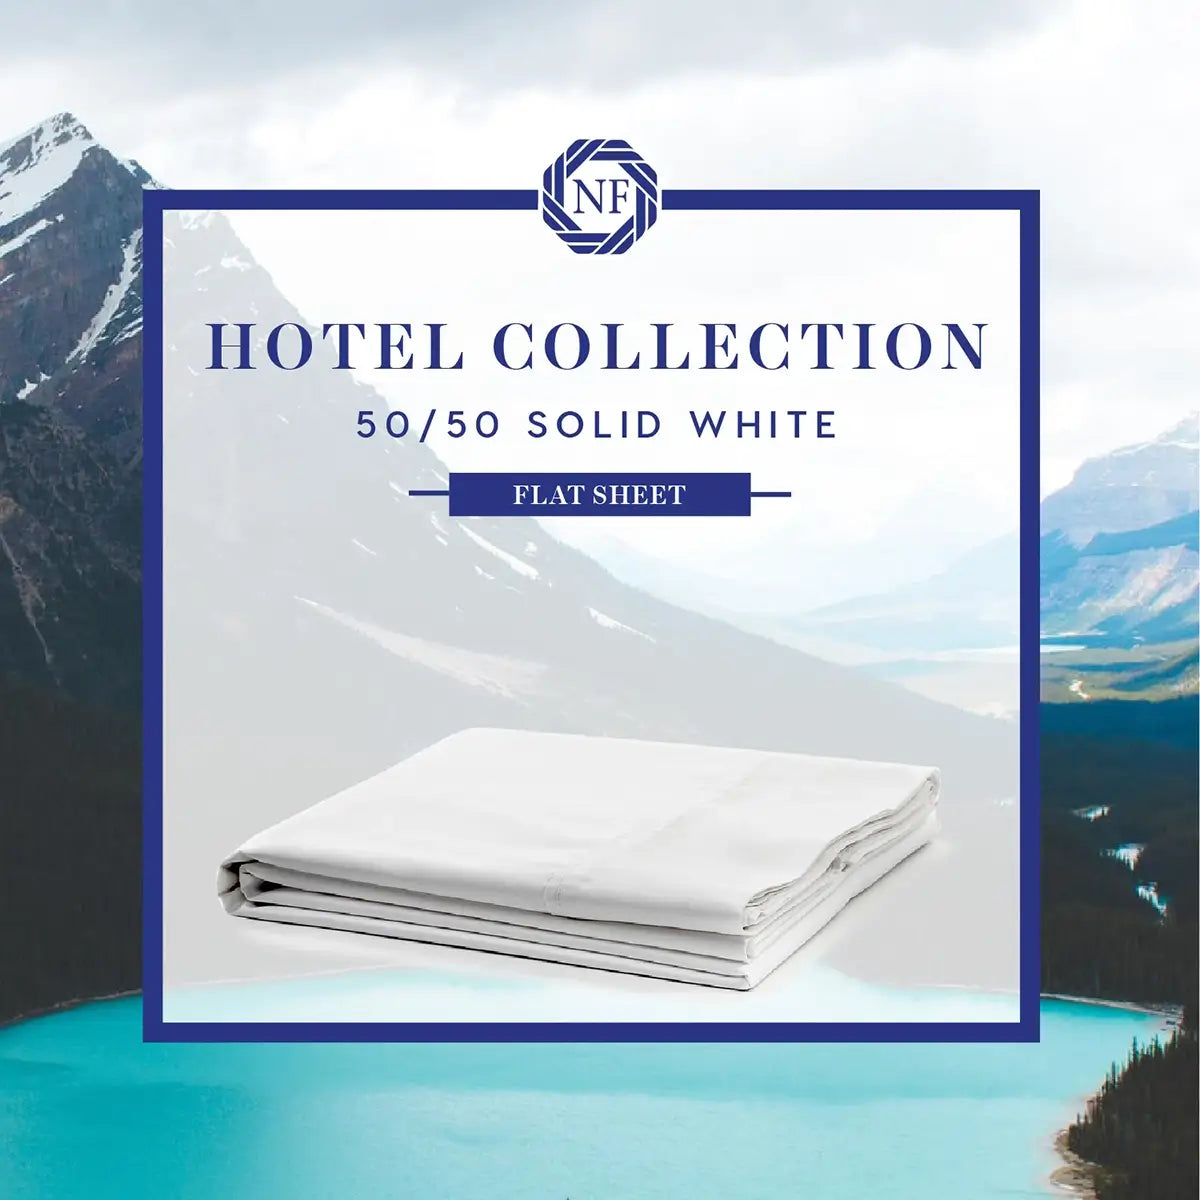 Hotel Collection - 50/50 Solid White Linen Flat Sheet - Northern Feather Canada eStore